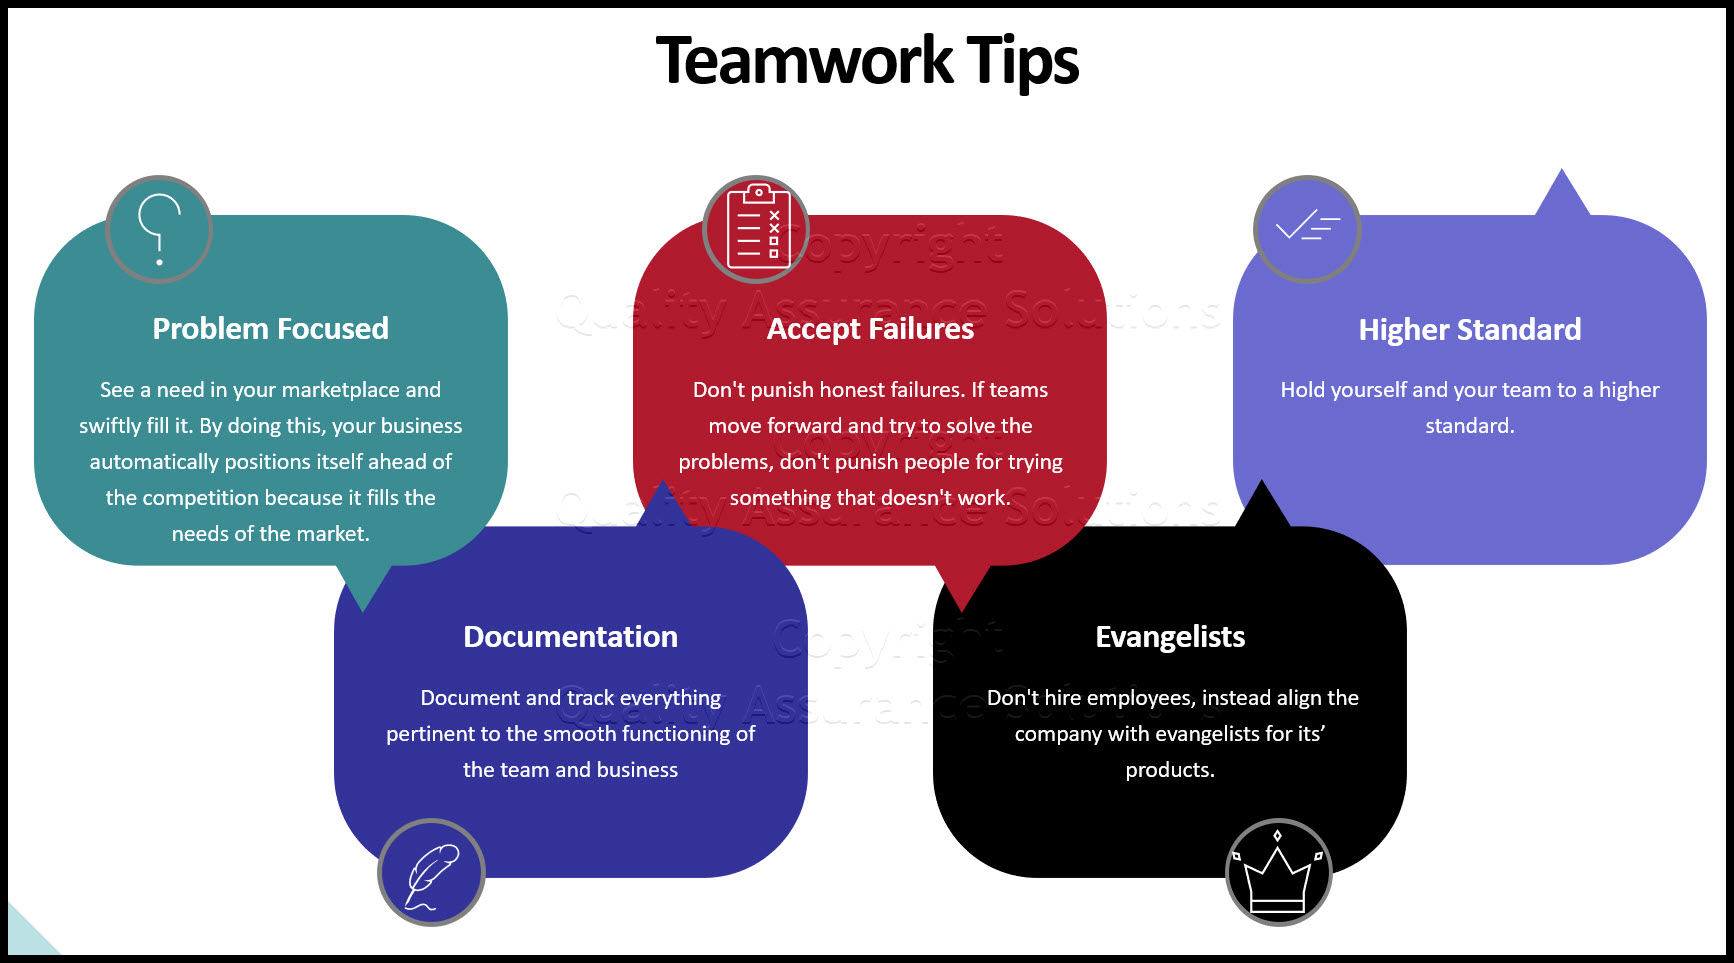 Teamwork tips to help you toward a more successful team and business.